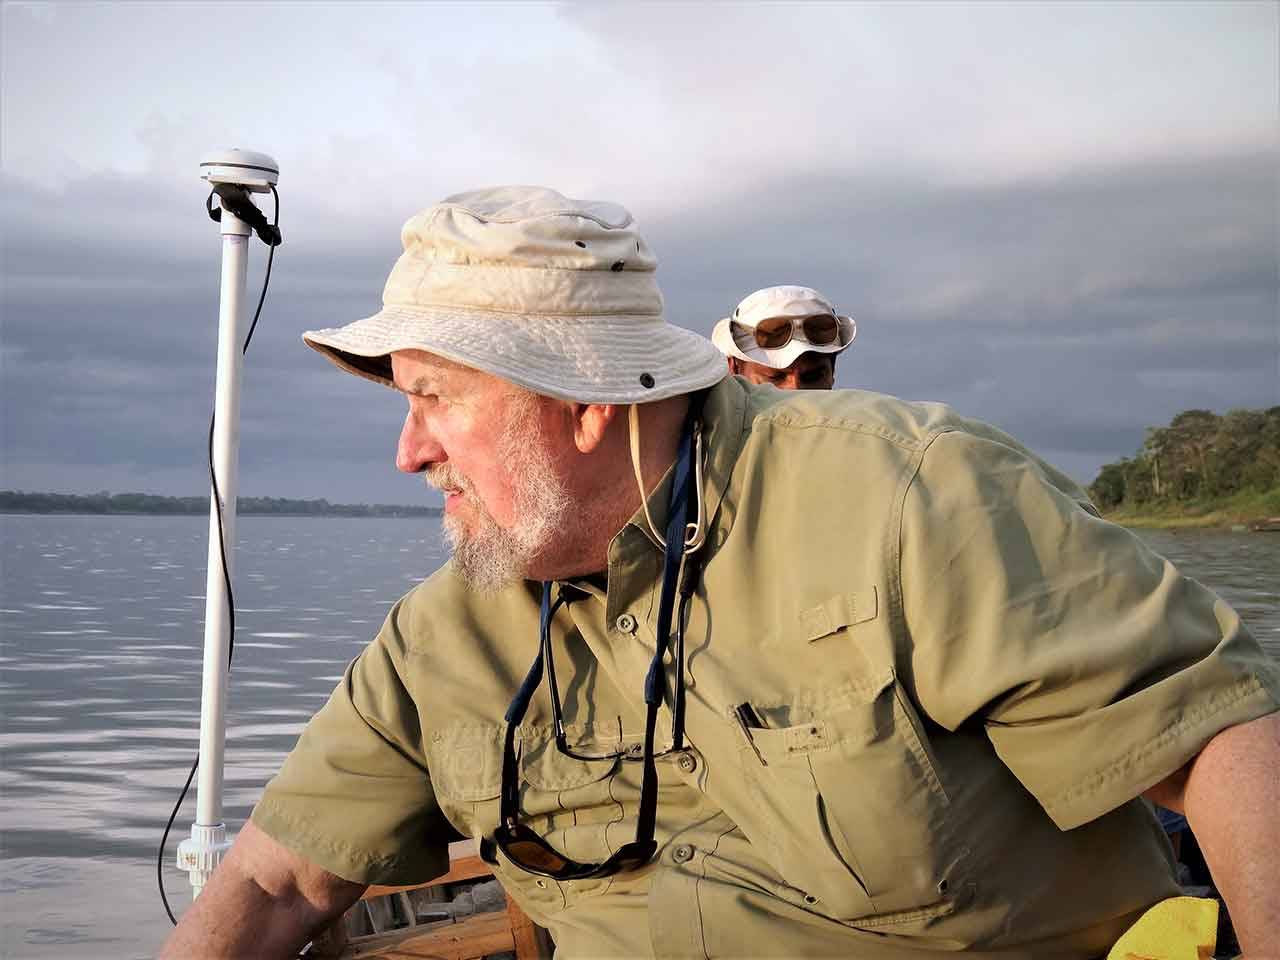 Researcher Dave Bonnett will present recent findings about Amazonian pink river dolphins Sunday as part of the Port Townsend Marine Science Center’s lecture series. (Port Townsend Marine Science Center)